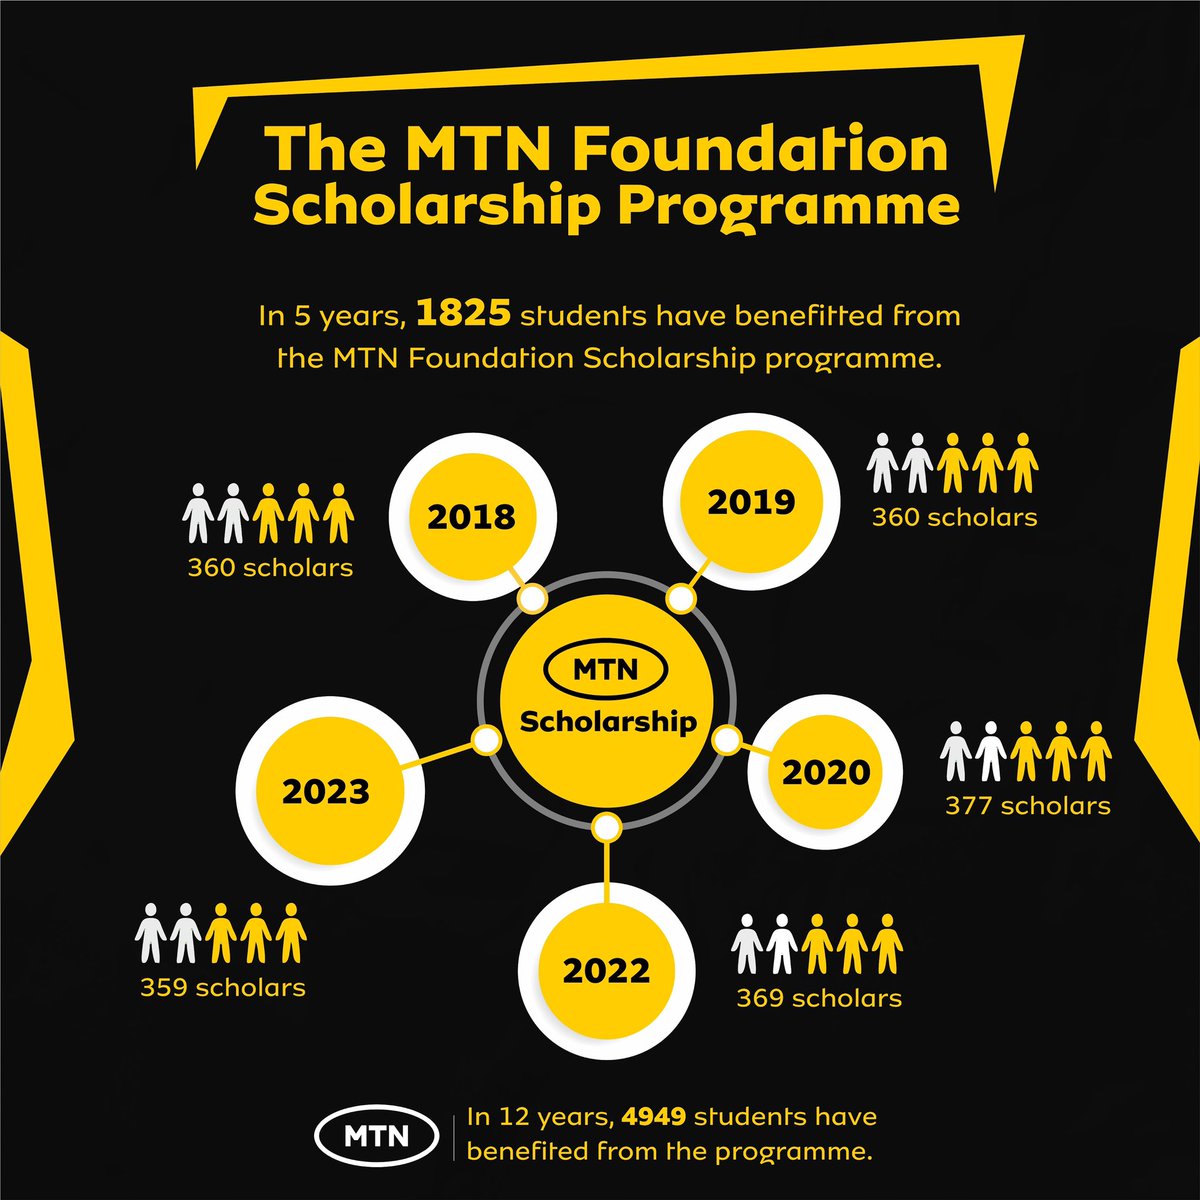 In 12 years, @MTNNG Scholarship Programme  has positively  impacted the lives of 4,949 students in Nigeria. Countdown to the 2024 MTN Scholarship edition flagging off on Monday 6th May, 2024. Don't miss this opportunity to become a MTN scholar. #MTNScholarships2024